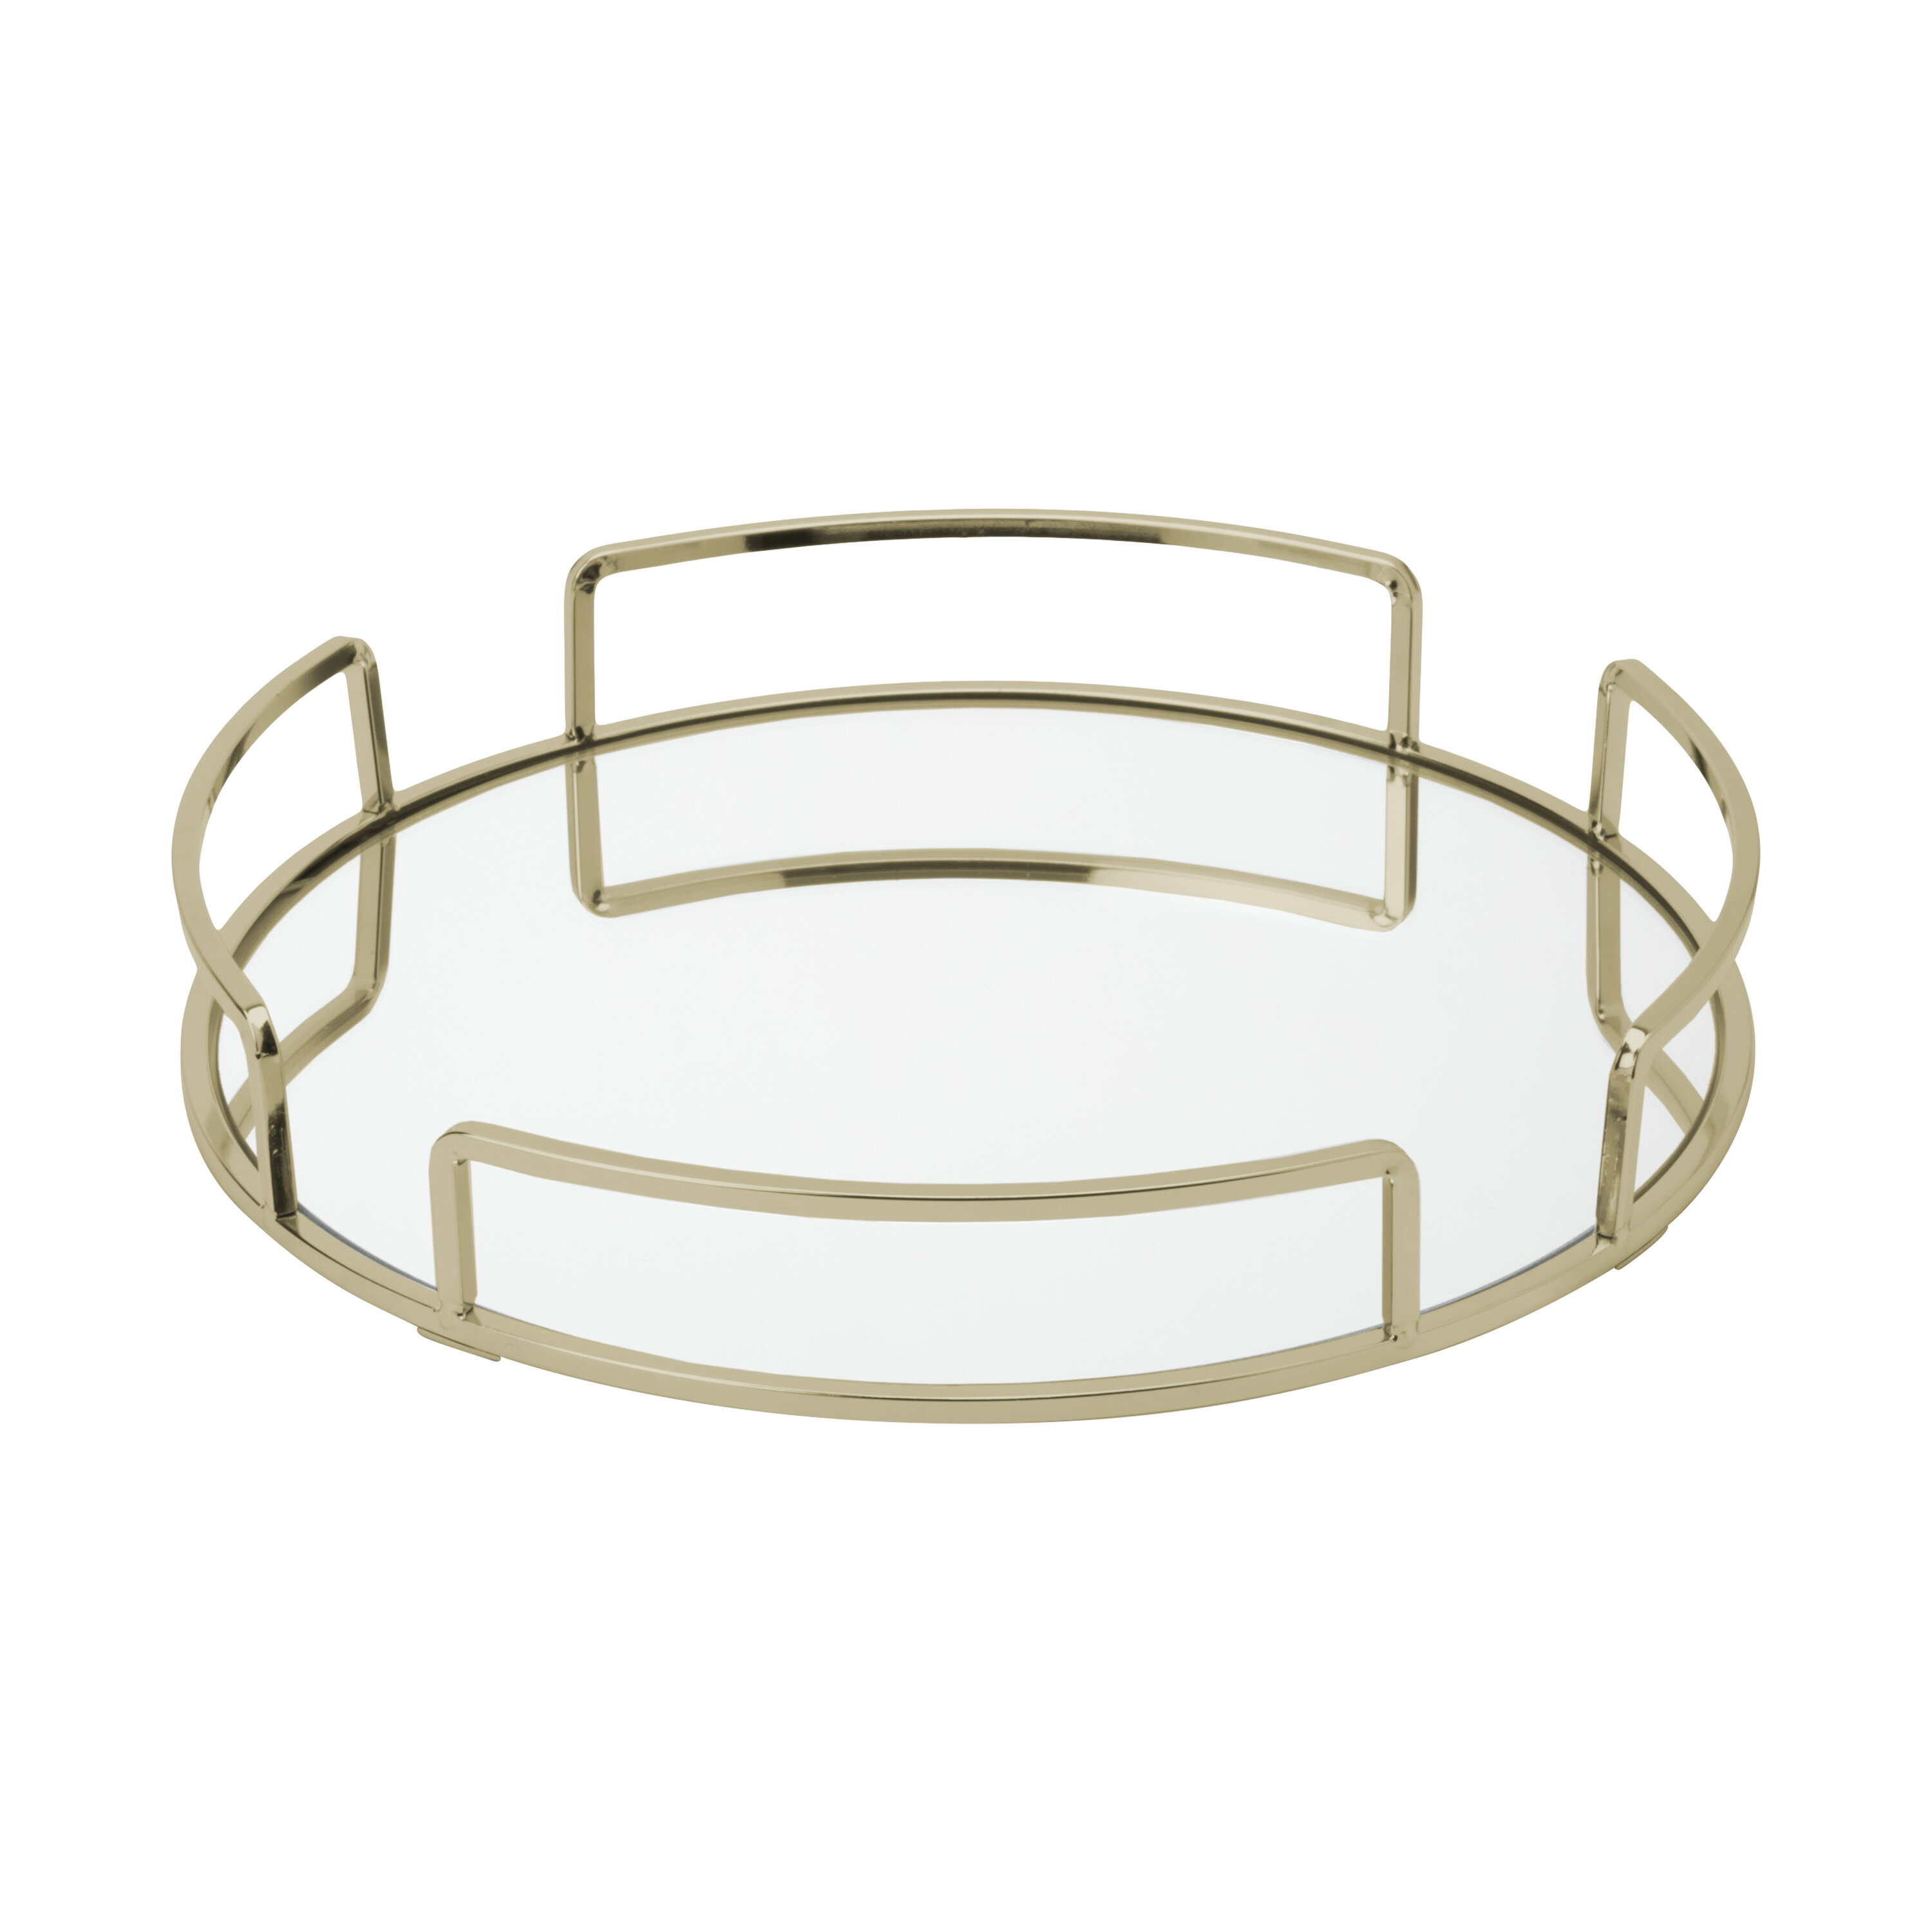 Everly Quinn Mcmeans Metal Tray & Reviews | Wayfair